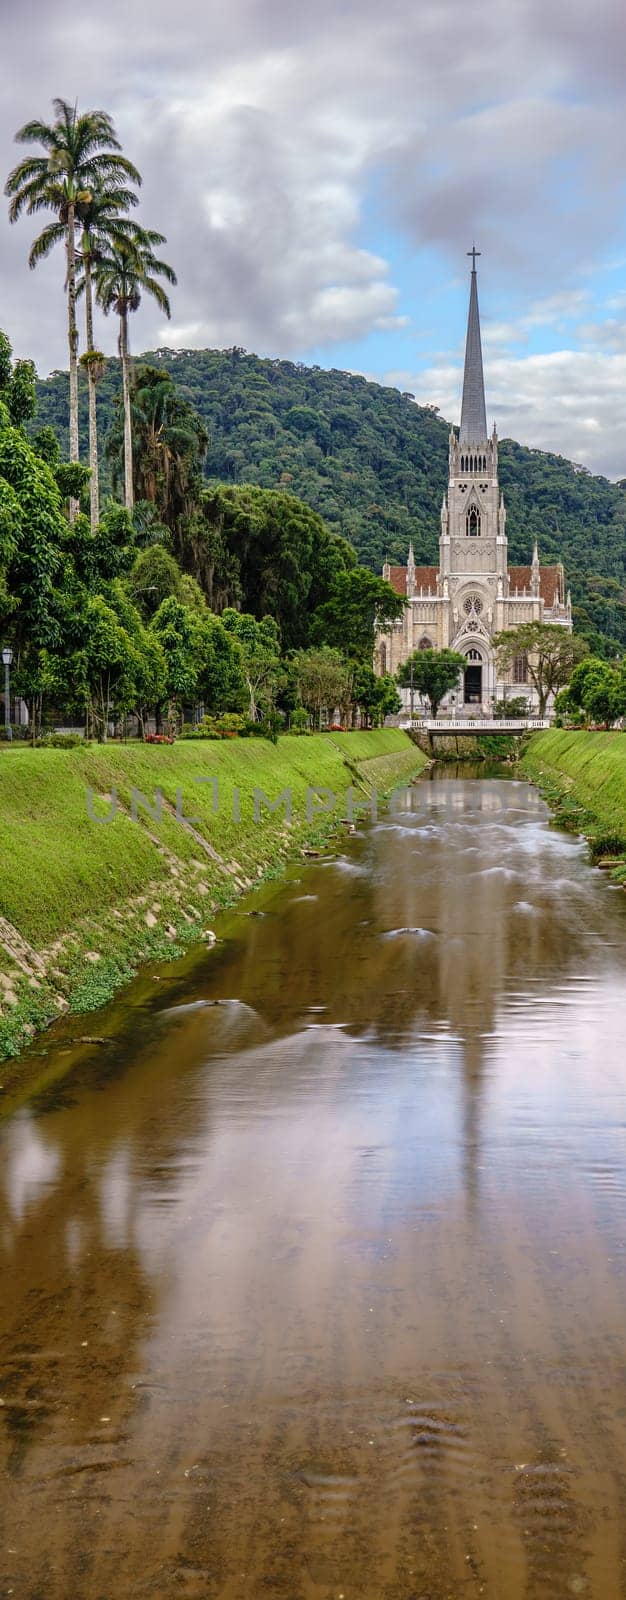 The beautiful Canal and Cathedral of Petropolis, with a vertical view capturing the water in motion with a long exposure. The cloudy sky adds to the atmosphere. Perfect for travel and history publications.